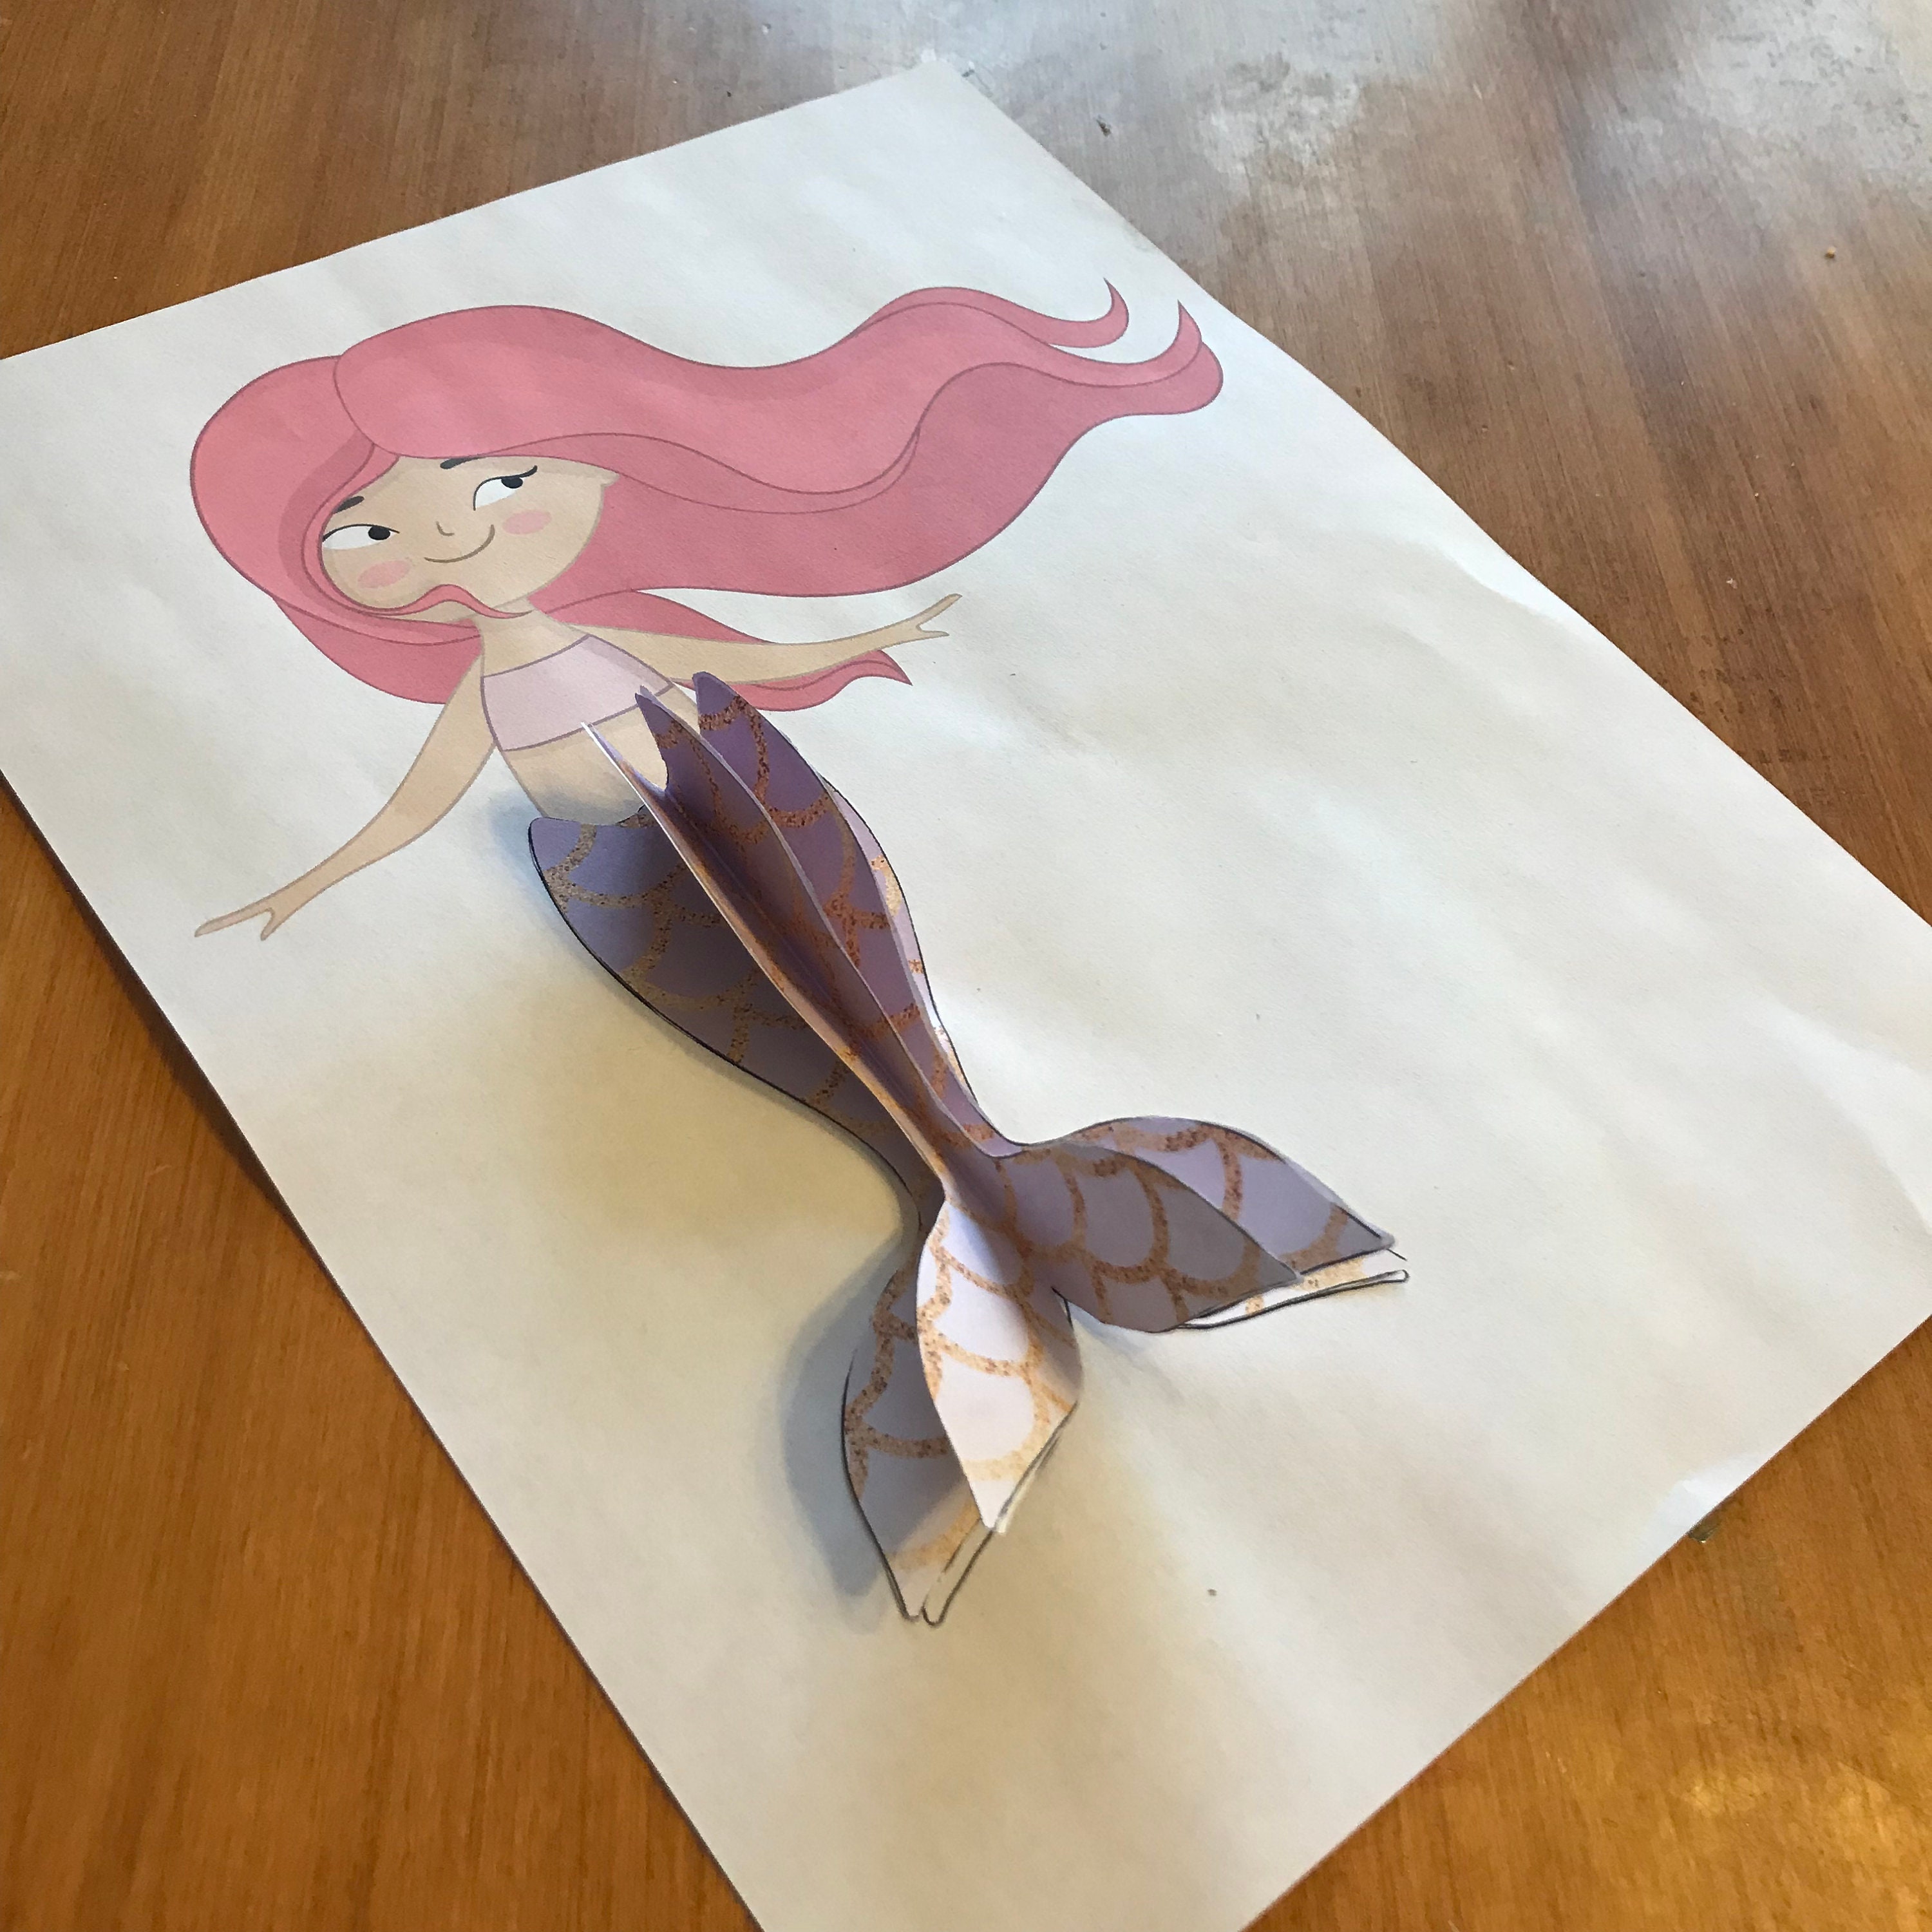 Paper Mermaid Craft - Made To Be A Momma